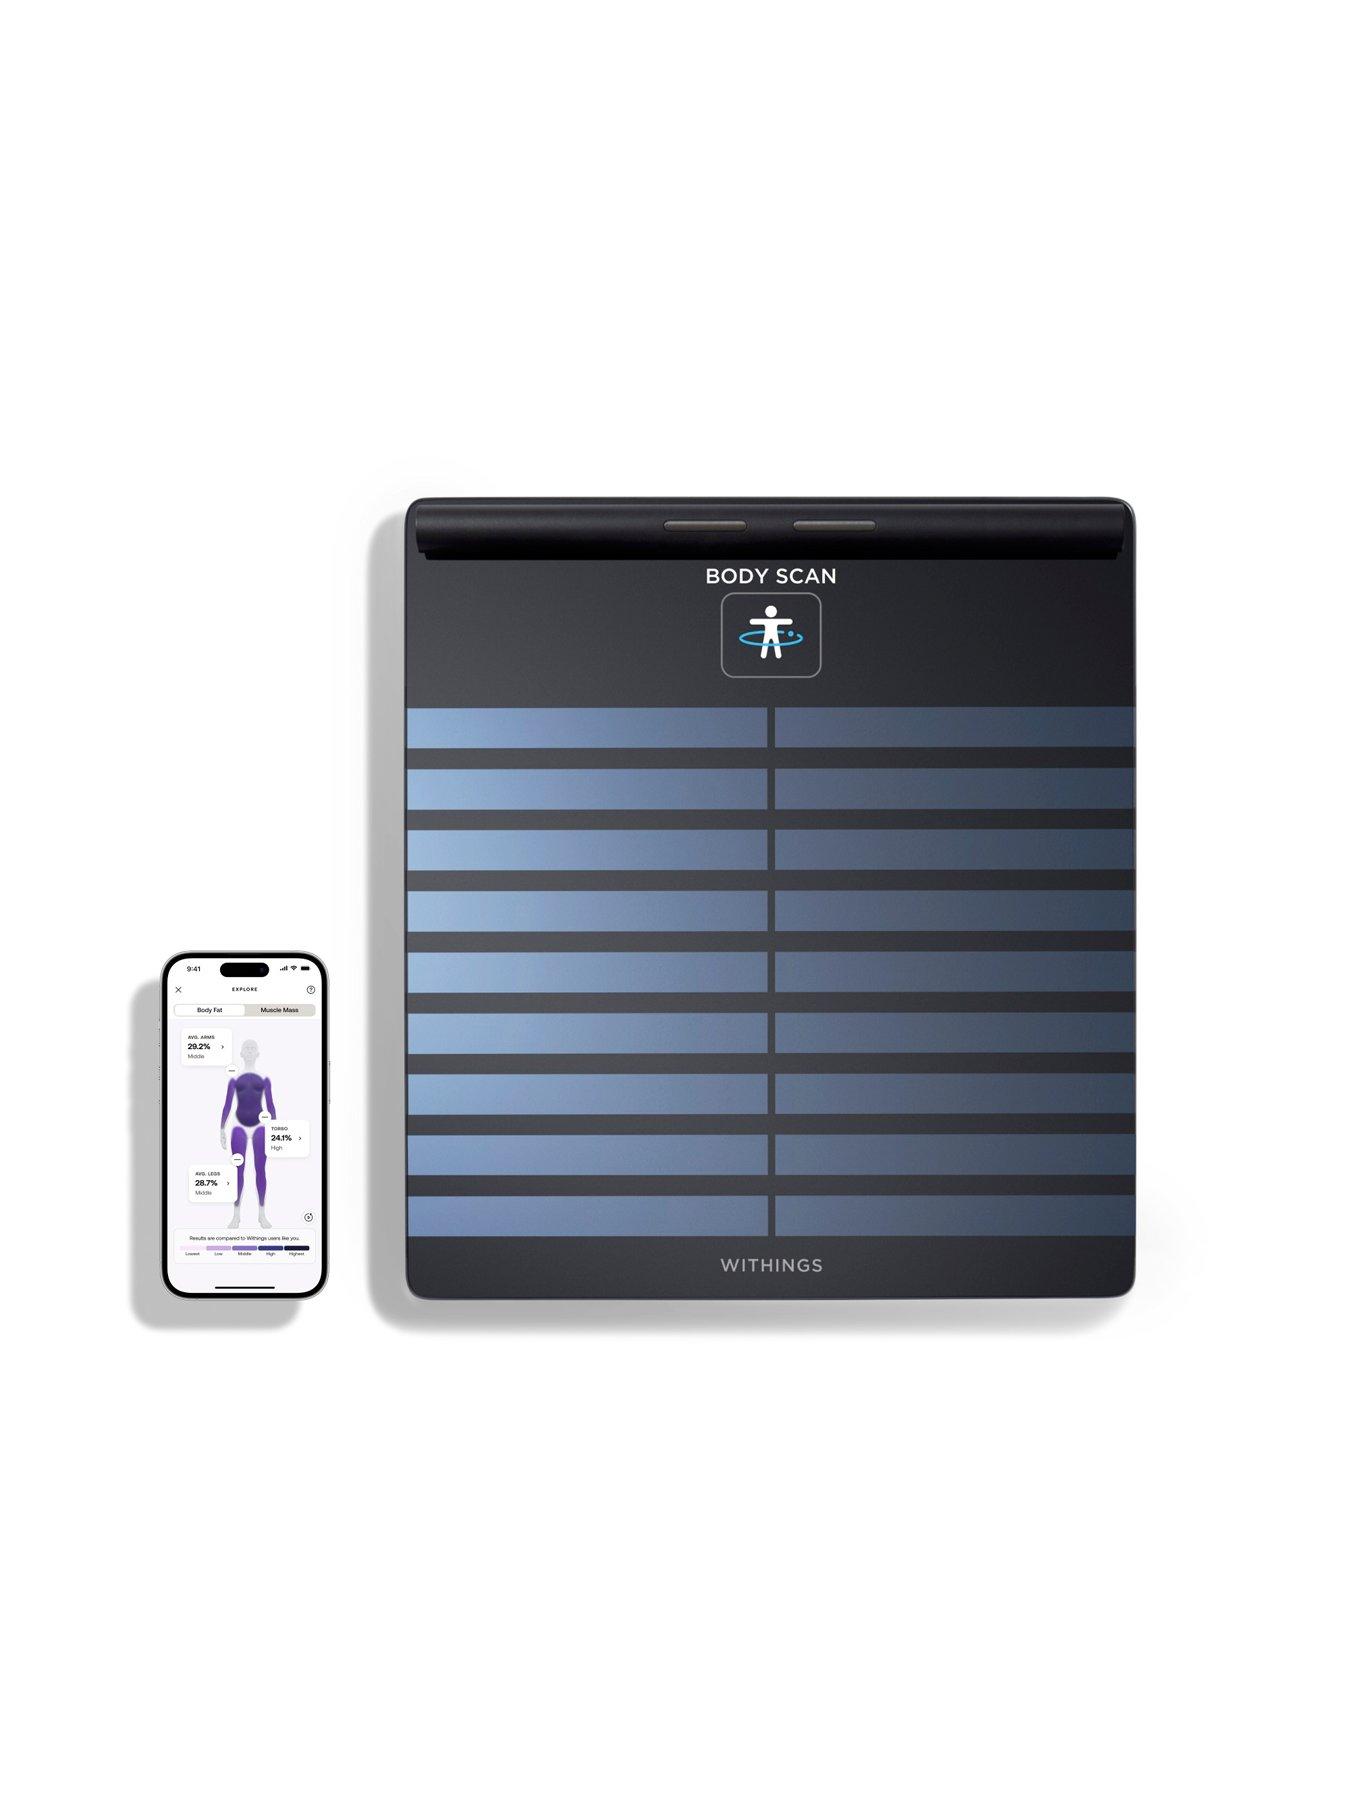 Withings Body Scan - Connected Health Station Smart Scale